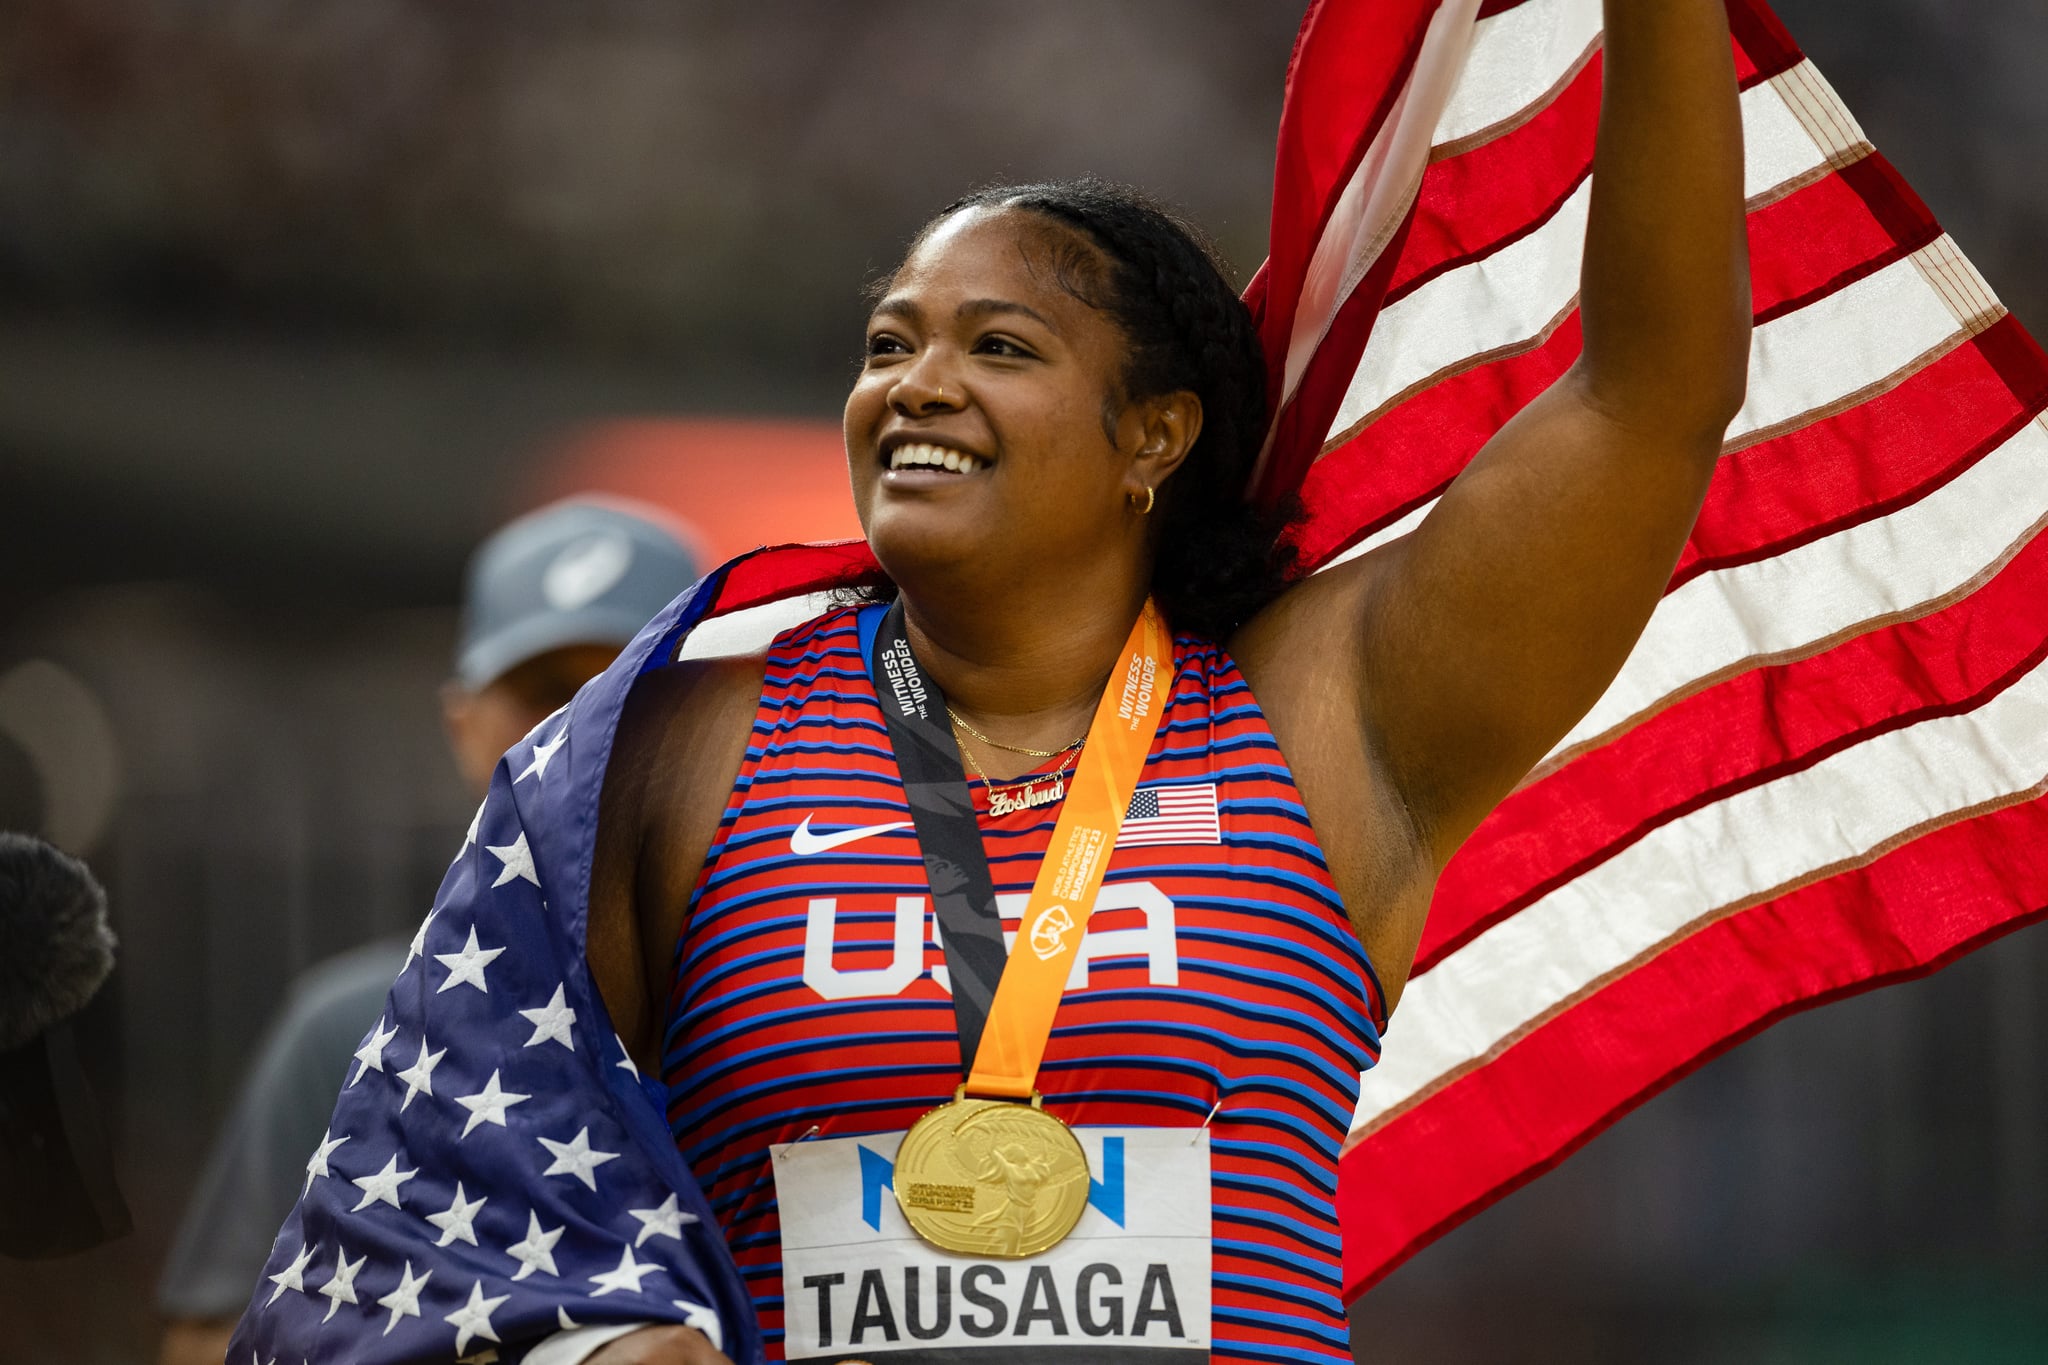 BUDAPEST, HUNGARY - AUGUST 22: Laulauga Tausaga of the United States following the women's discus throw final during day four of the World Athletics Championships Budapest 2023 at National Athletics Centre on August 22, 2023 in Budapest, Hungary. (Photo by Sam Mellish/Getty Images)